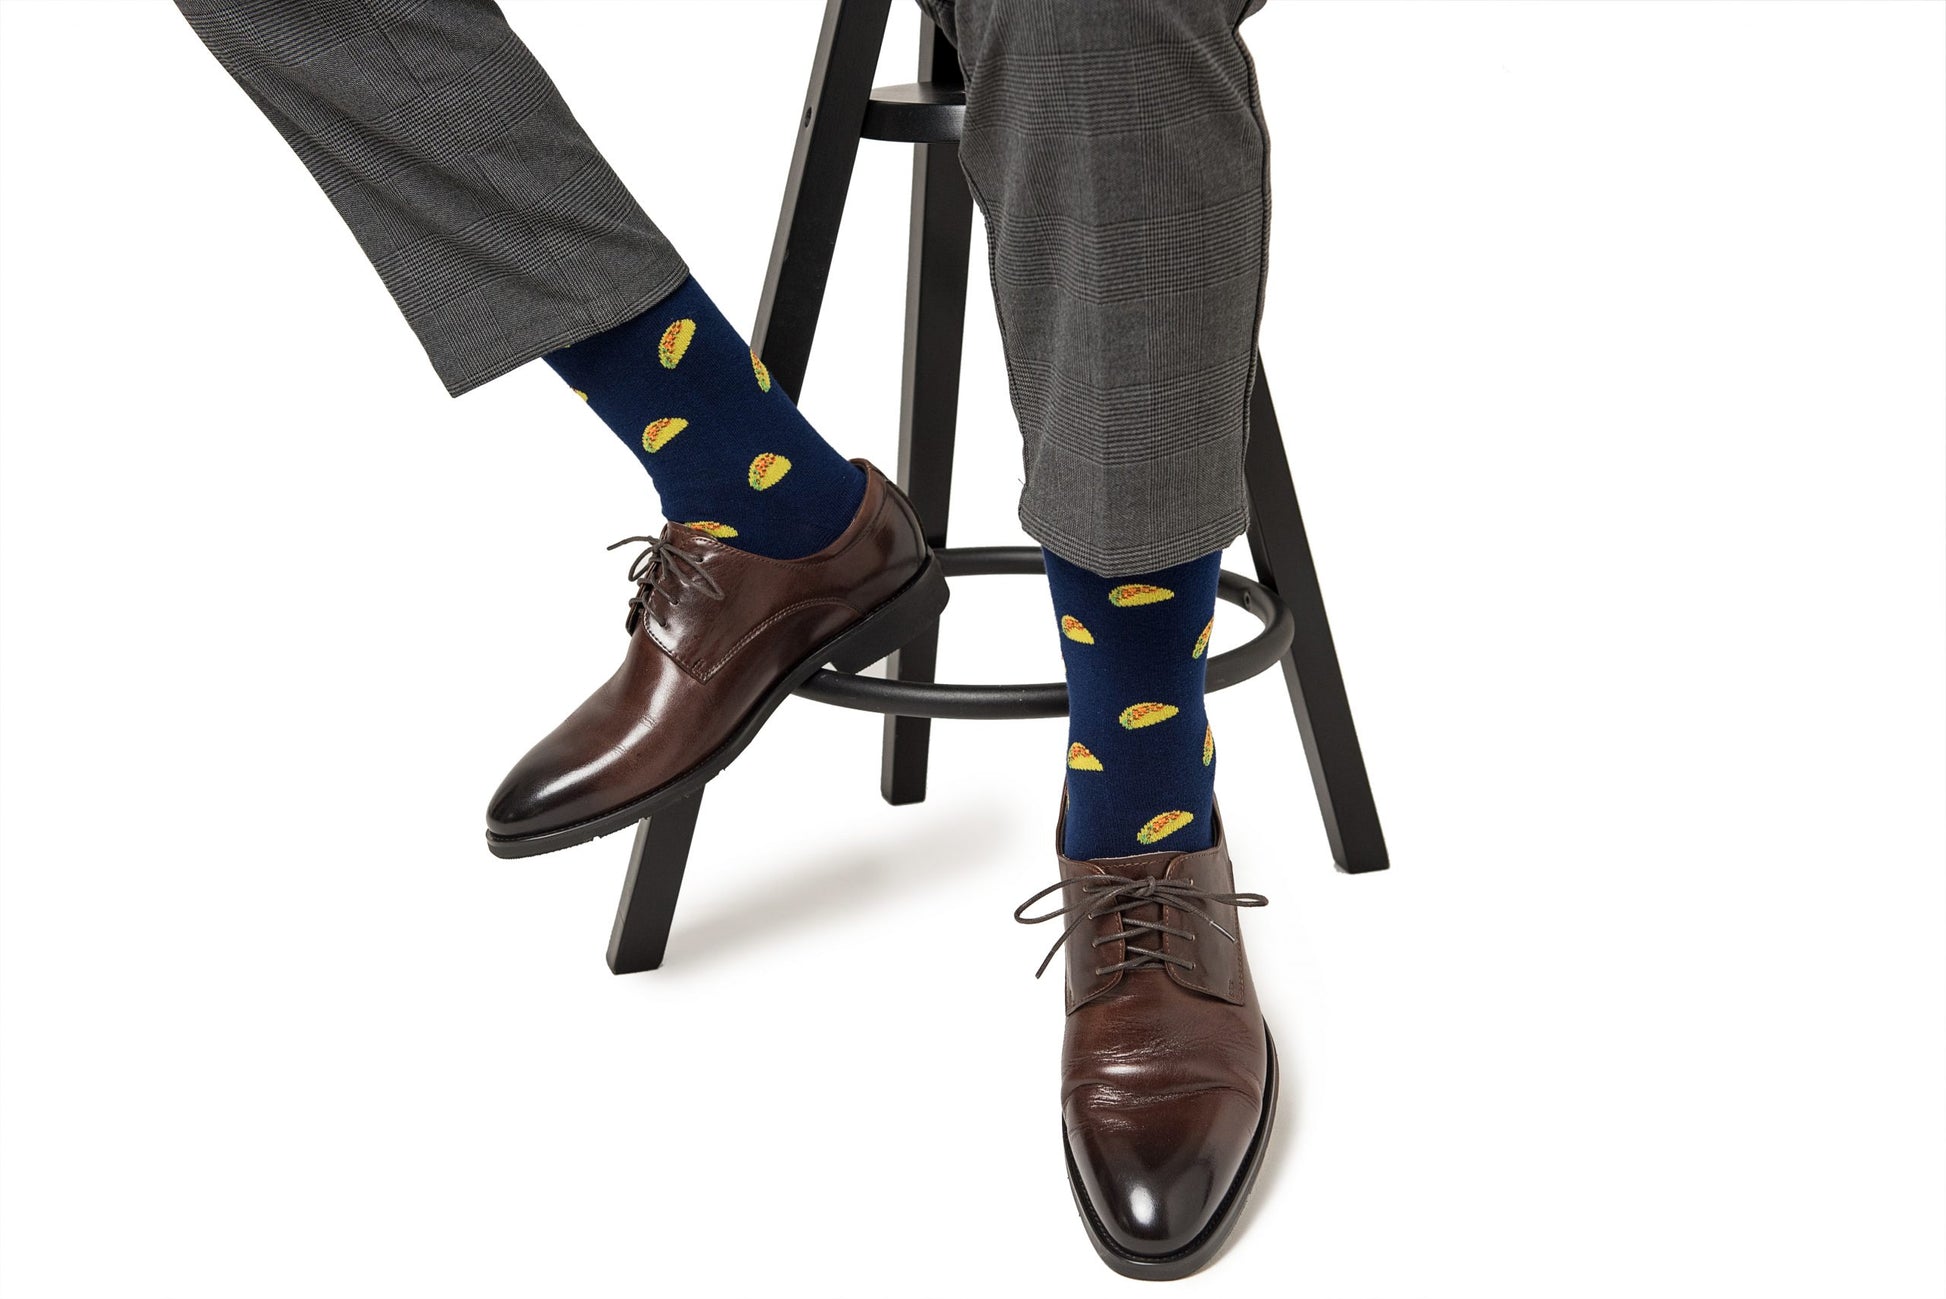 A person sits on a stool wearing brown leather shoes and flavor-packed Taco Socks with lemon patterns, paired with grey trousers.